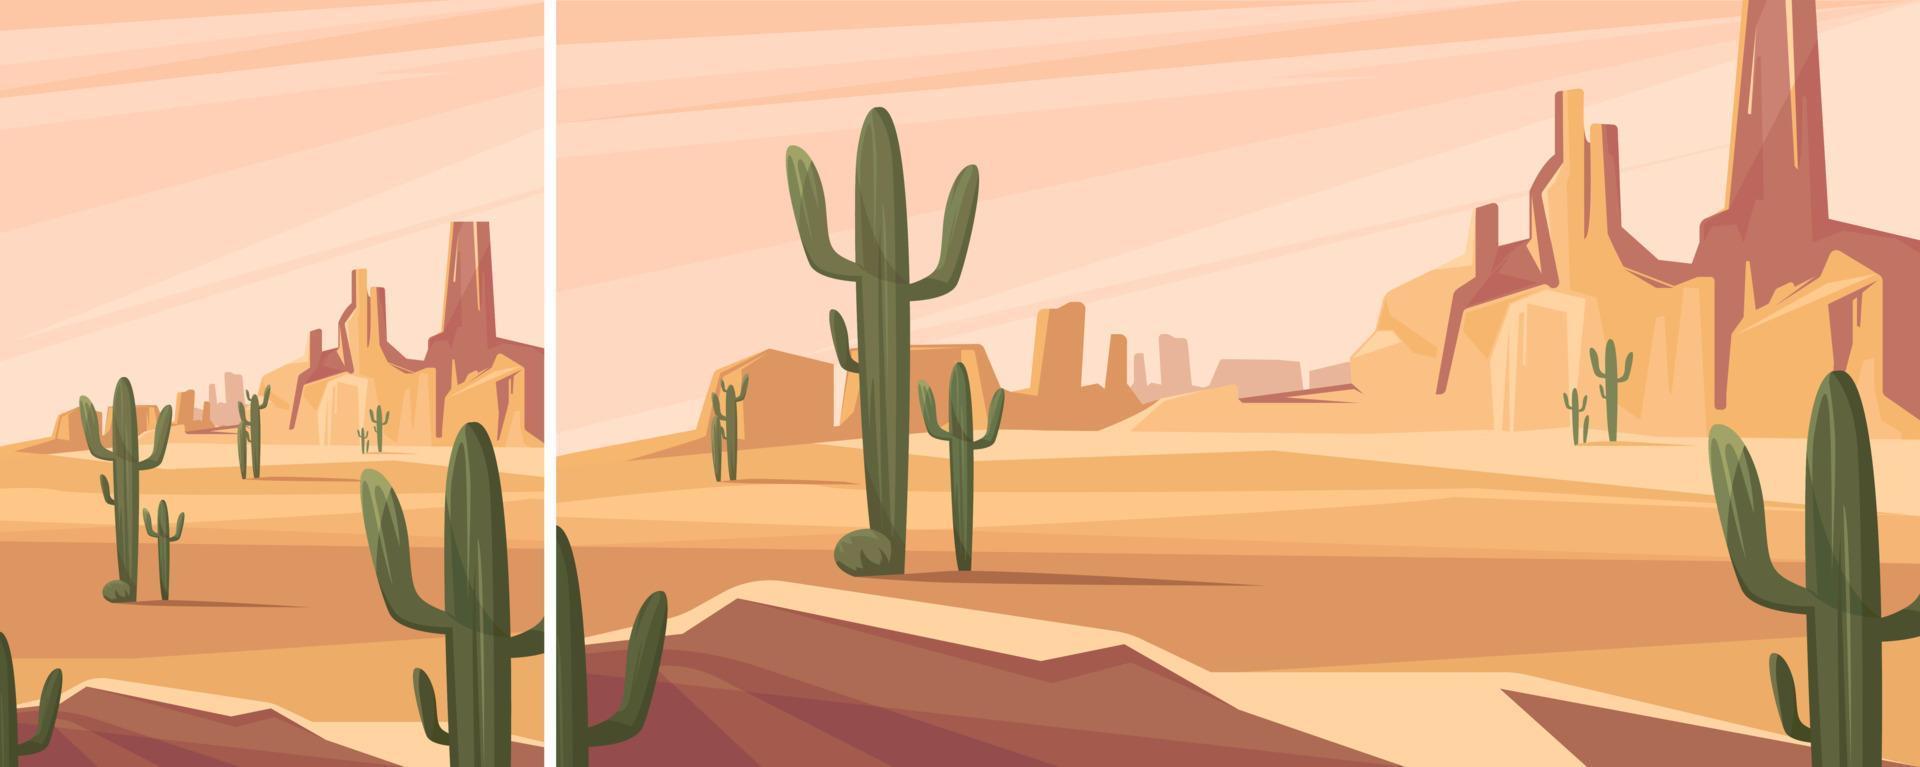 Texas desert landscape. Natural scenery in different formats. vector